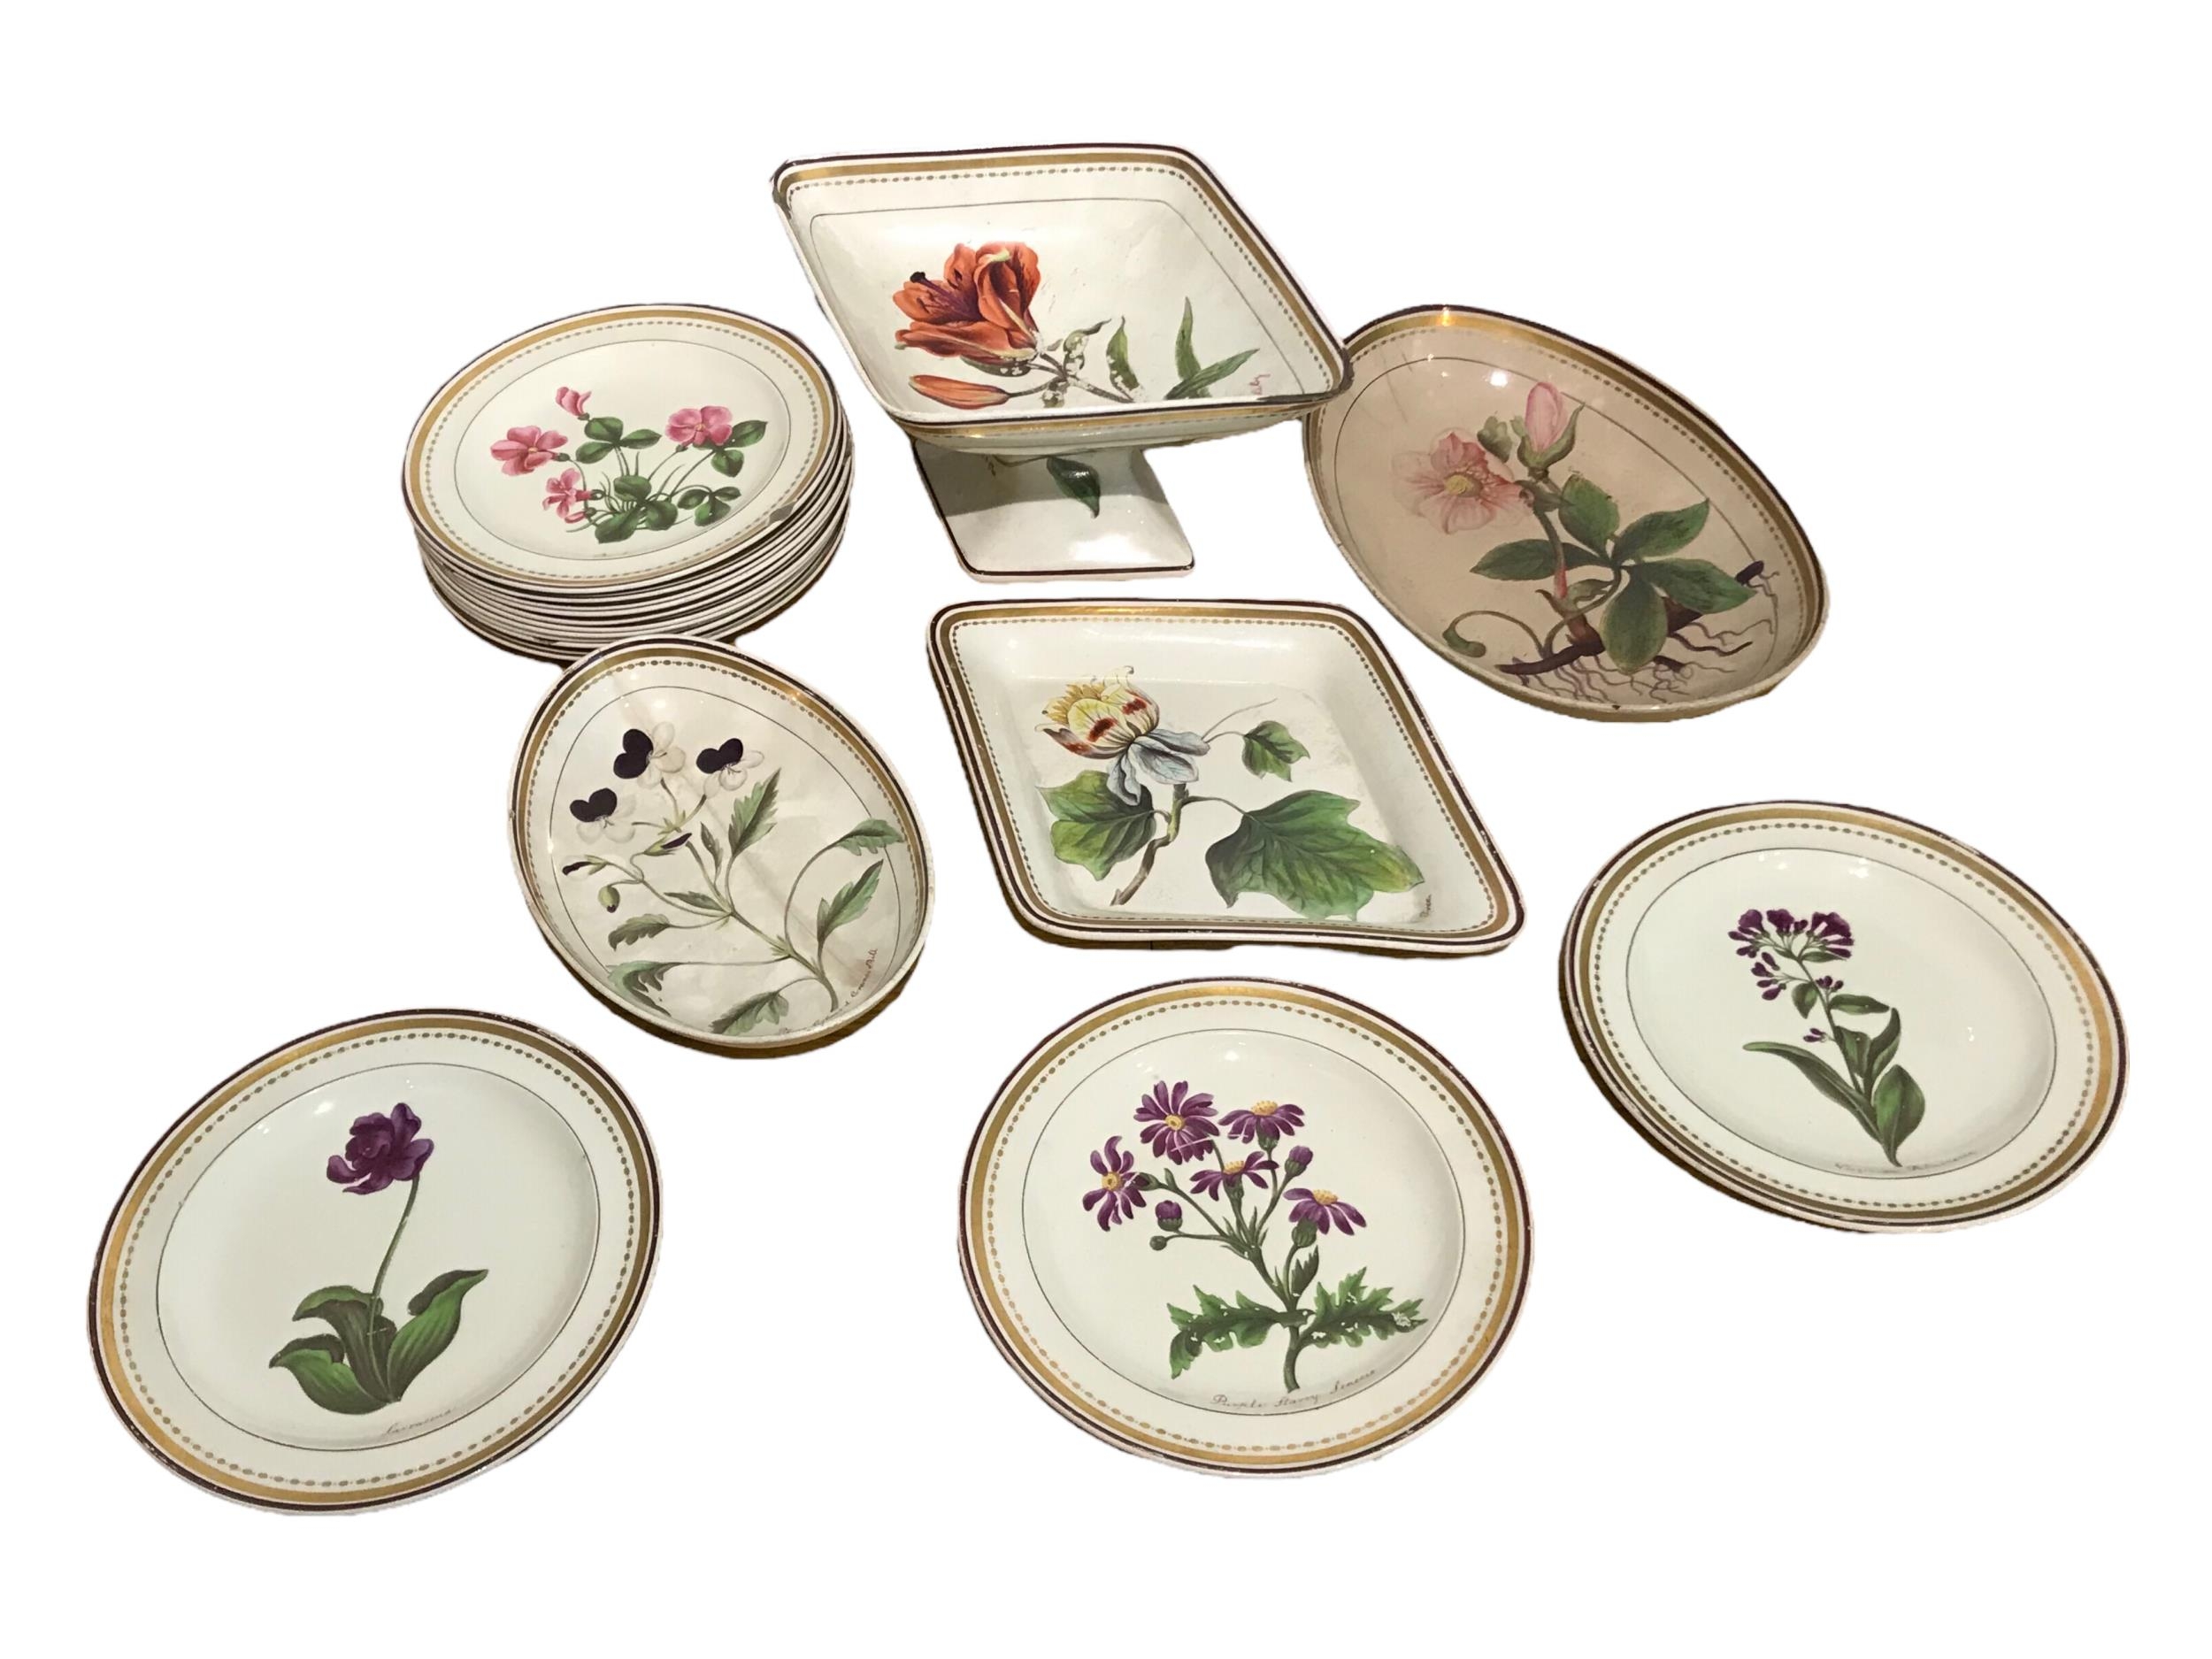 POSSIBLY SAMSON, A SET OF EARLY 19TH CENTURY HAND PAINTED FLORAL CERAMIC PLATES, BOWLS AND A DIAMOND